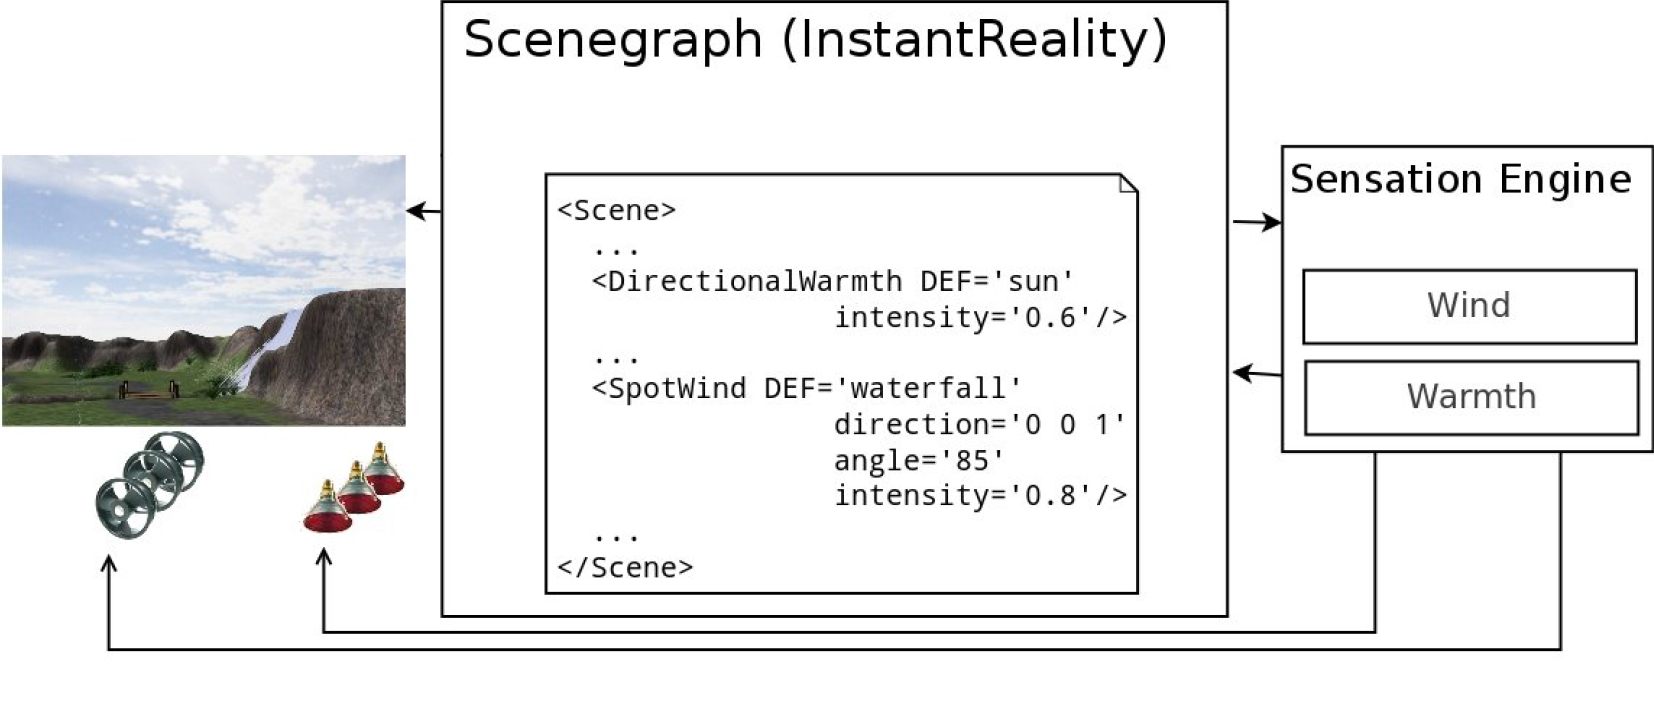 Short overview on the system's process flow. Parts of the InstantReality scenegraph (middle) is transfered to the Sensation Engine (right) which activates the wind and warmth hardware (left) and informs the scenegraph about changes in e.g. airflow.